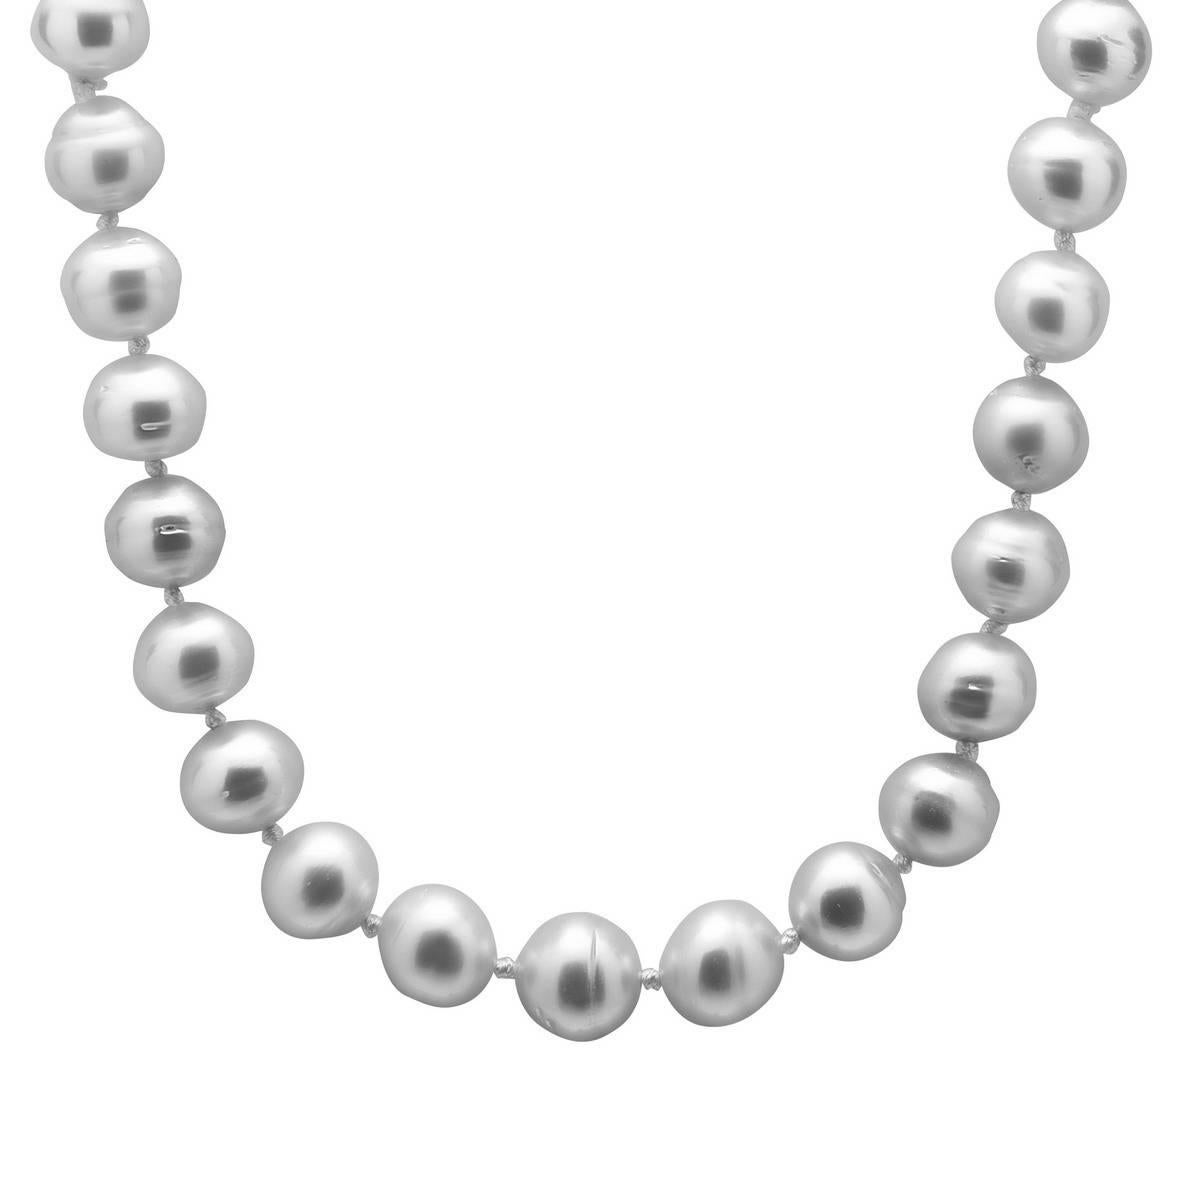 Elegant South Sea Pearl Necklace with gold ball clasp on the back strung on white thread. The pearl size range from 14mm -17mm 

18kt: 1.75g
Pearls: 653.75cts

